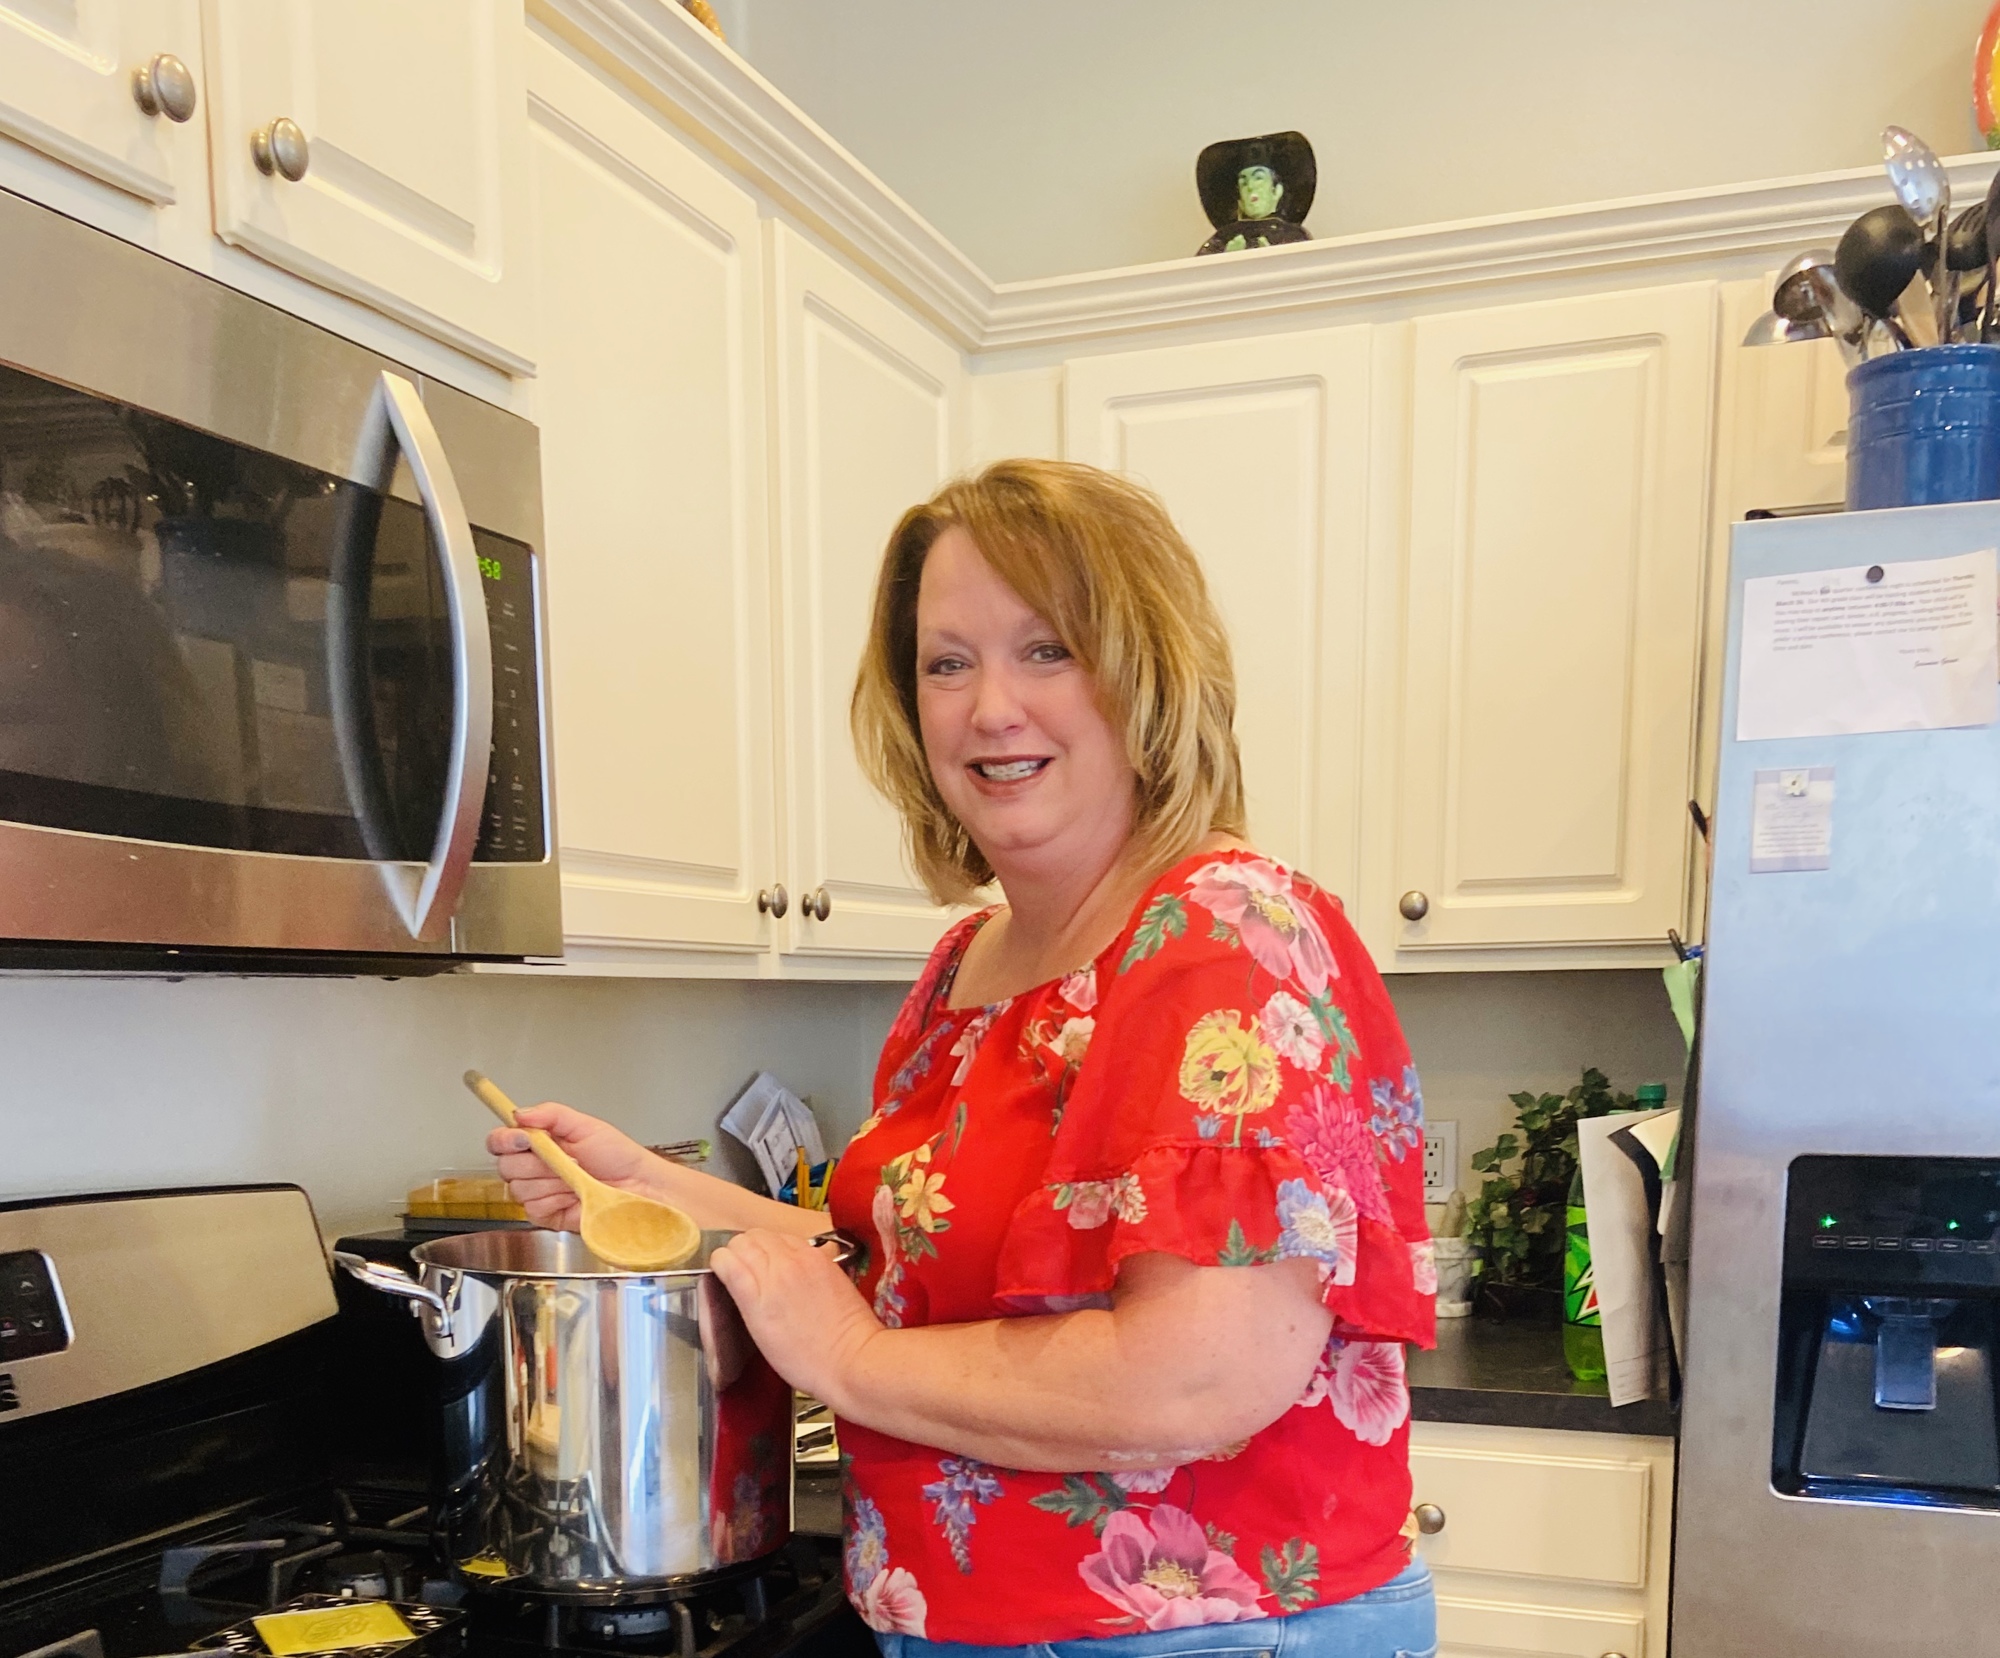 Rebecca Marchino has been using cooking apps to find creative recipes with foods she already has in her pantry. Courtesy photo.